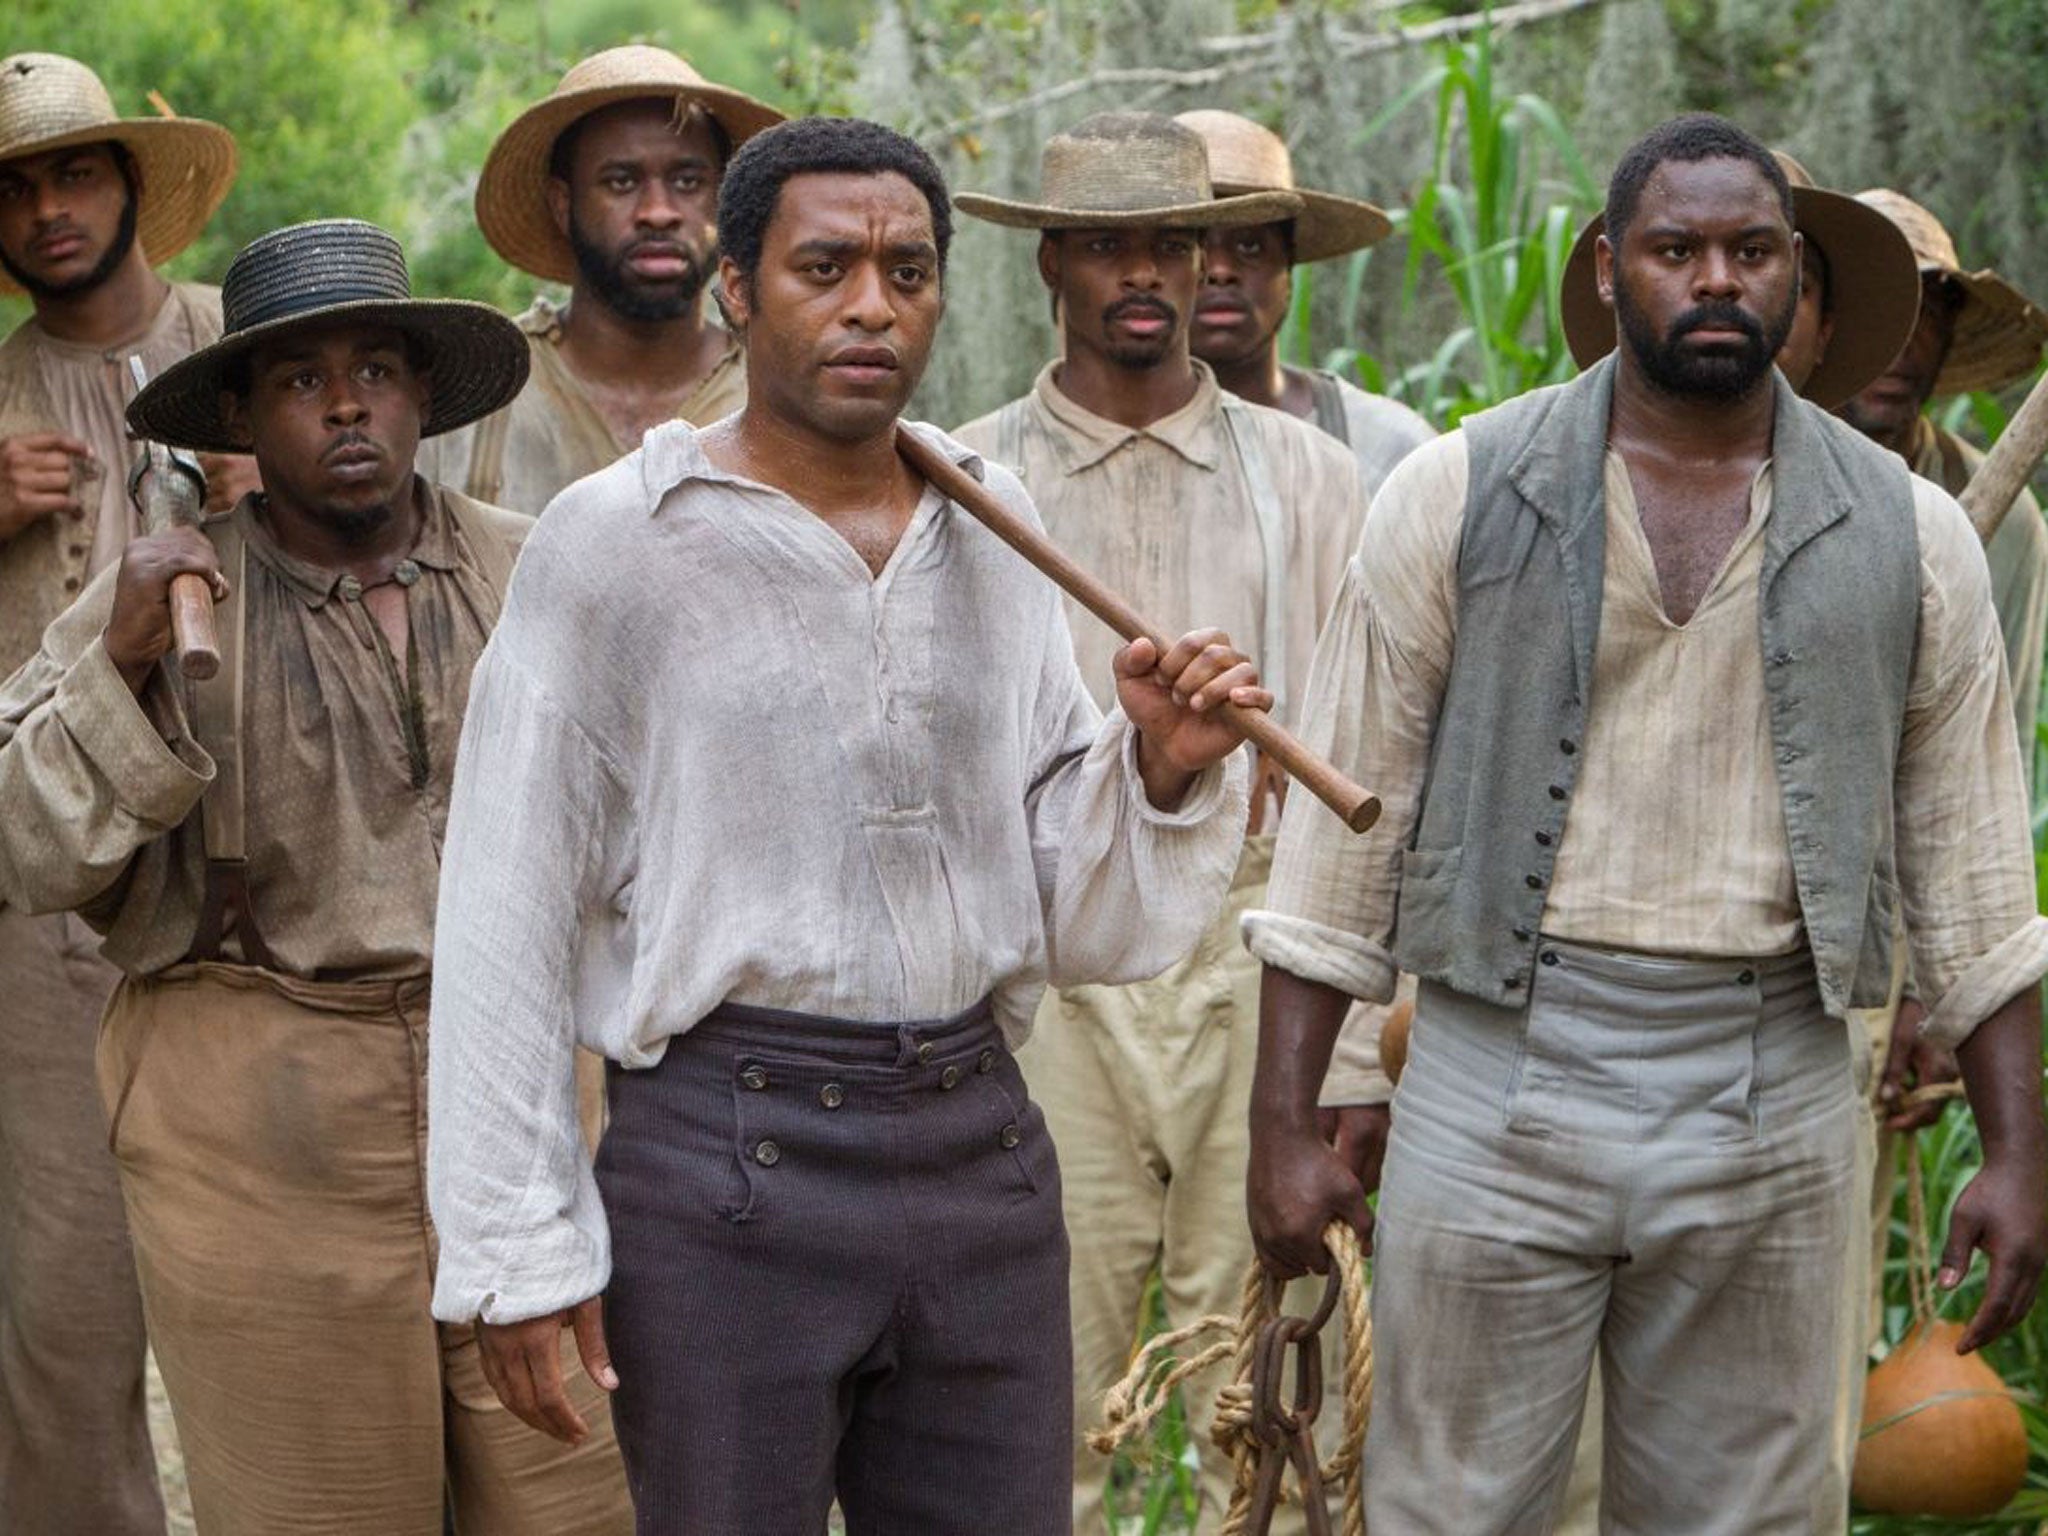 12 Years a Slave won best pictures at the 2014 Oscars